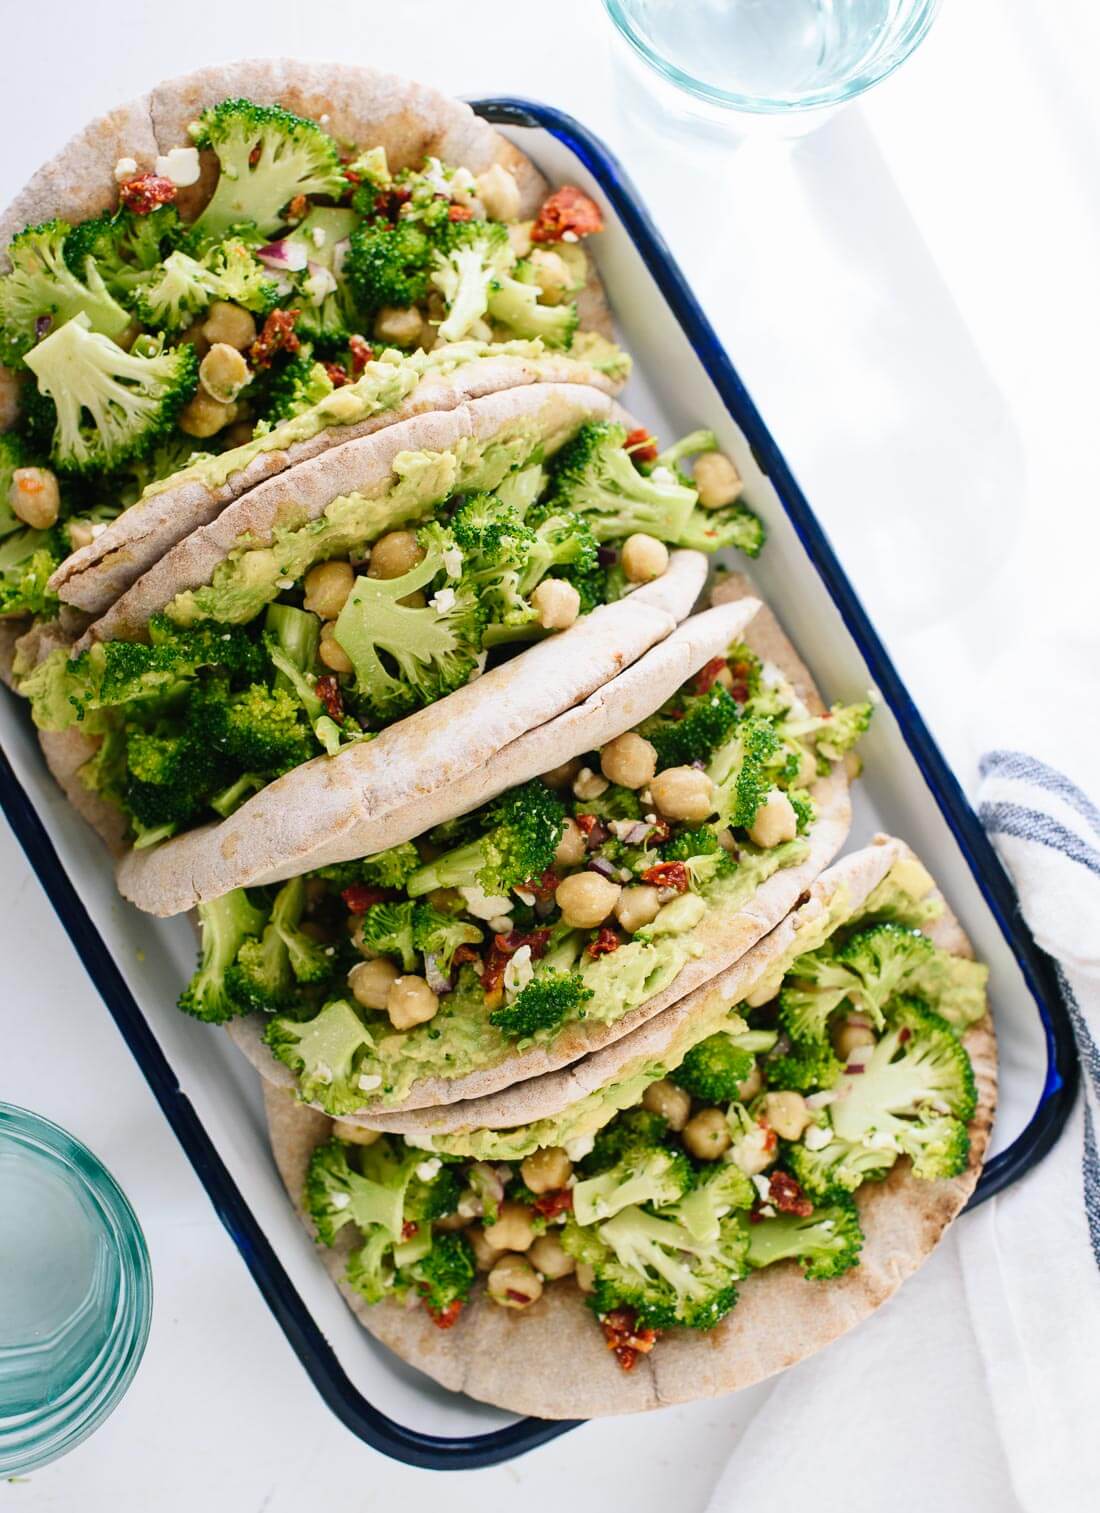 Simple and fresh broccoli chickpea pita sandwich lunch - get the recipe at cookieandkate.com